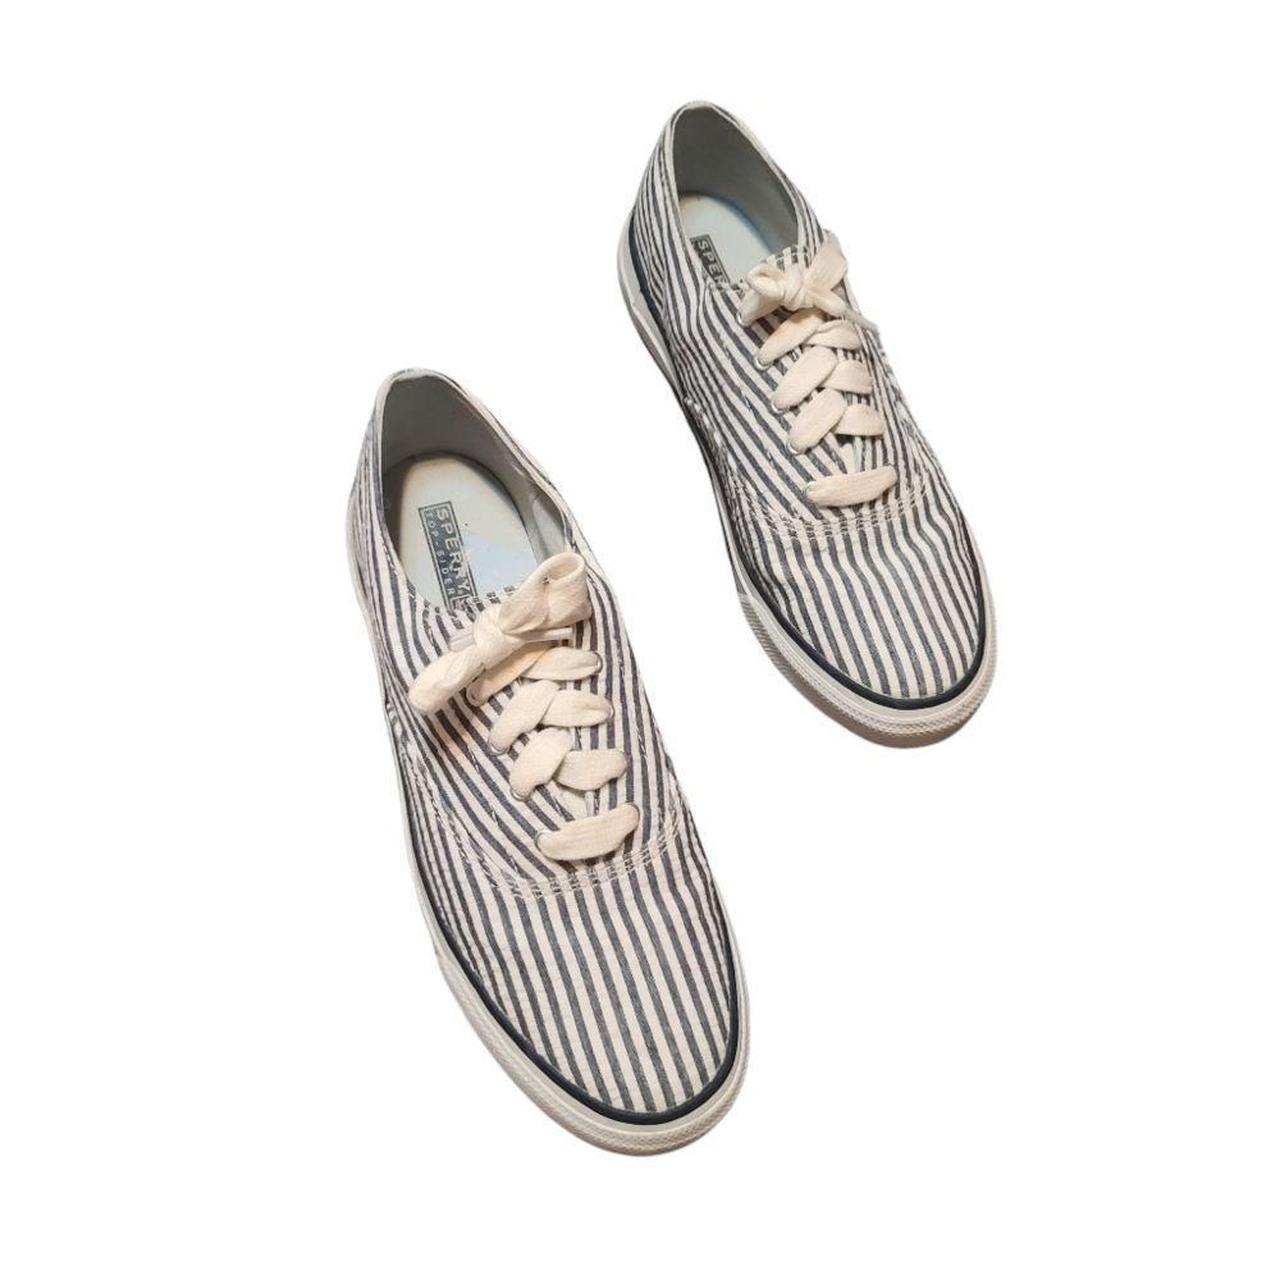 Sperry Women's Blue and White Trainers (2)